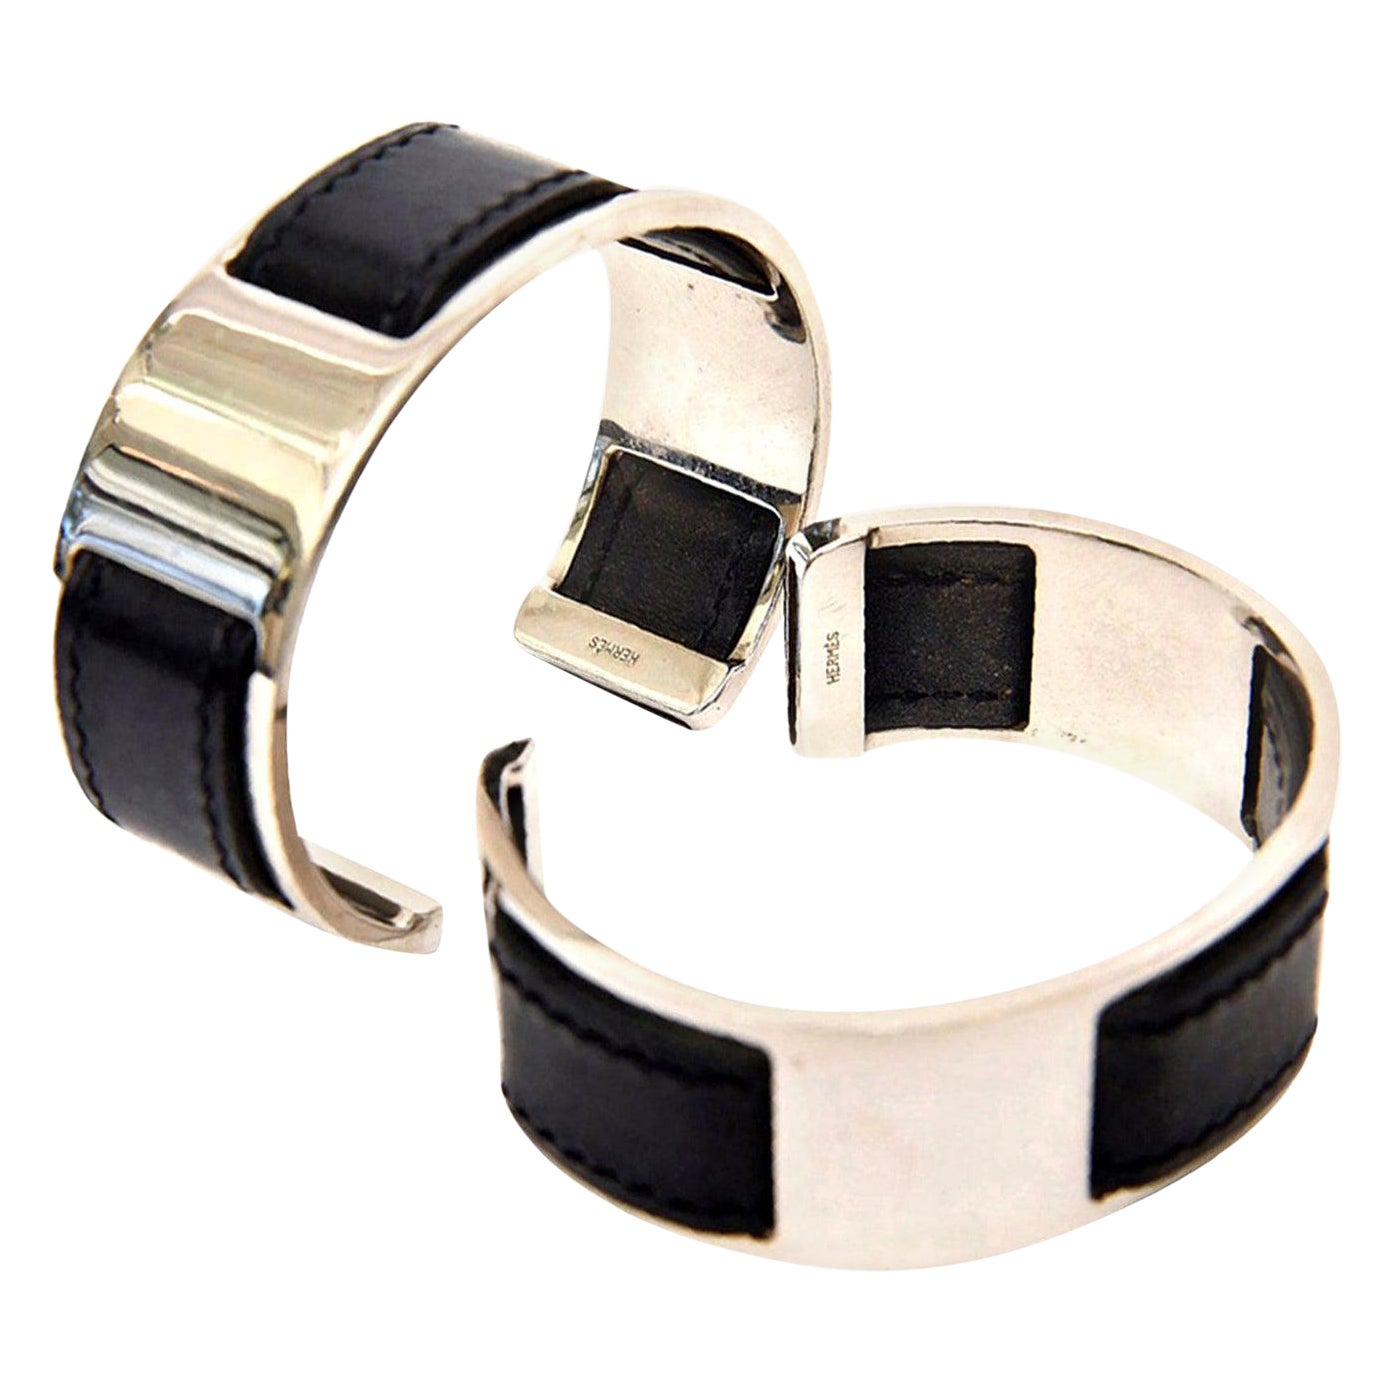  Hermes by Martin Margiela Black Leather & Chrome Plated Cuff Bracelets For Sale